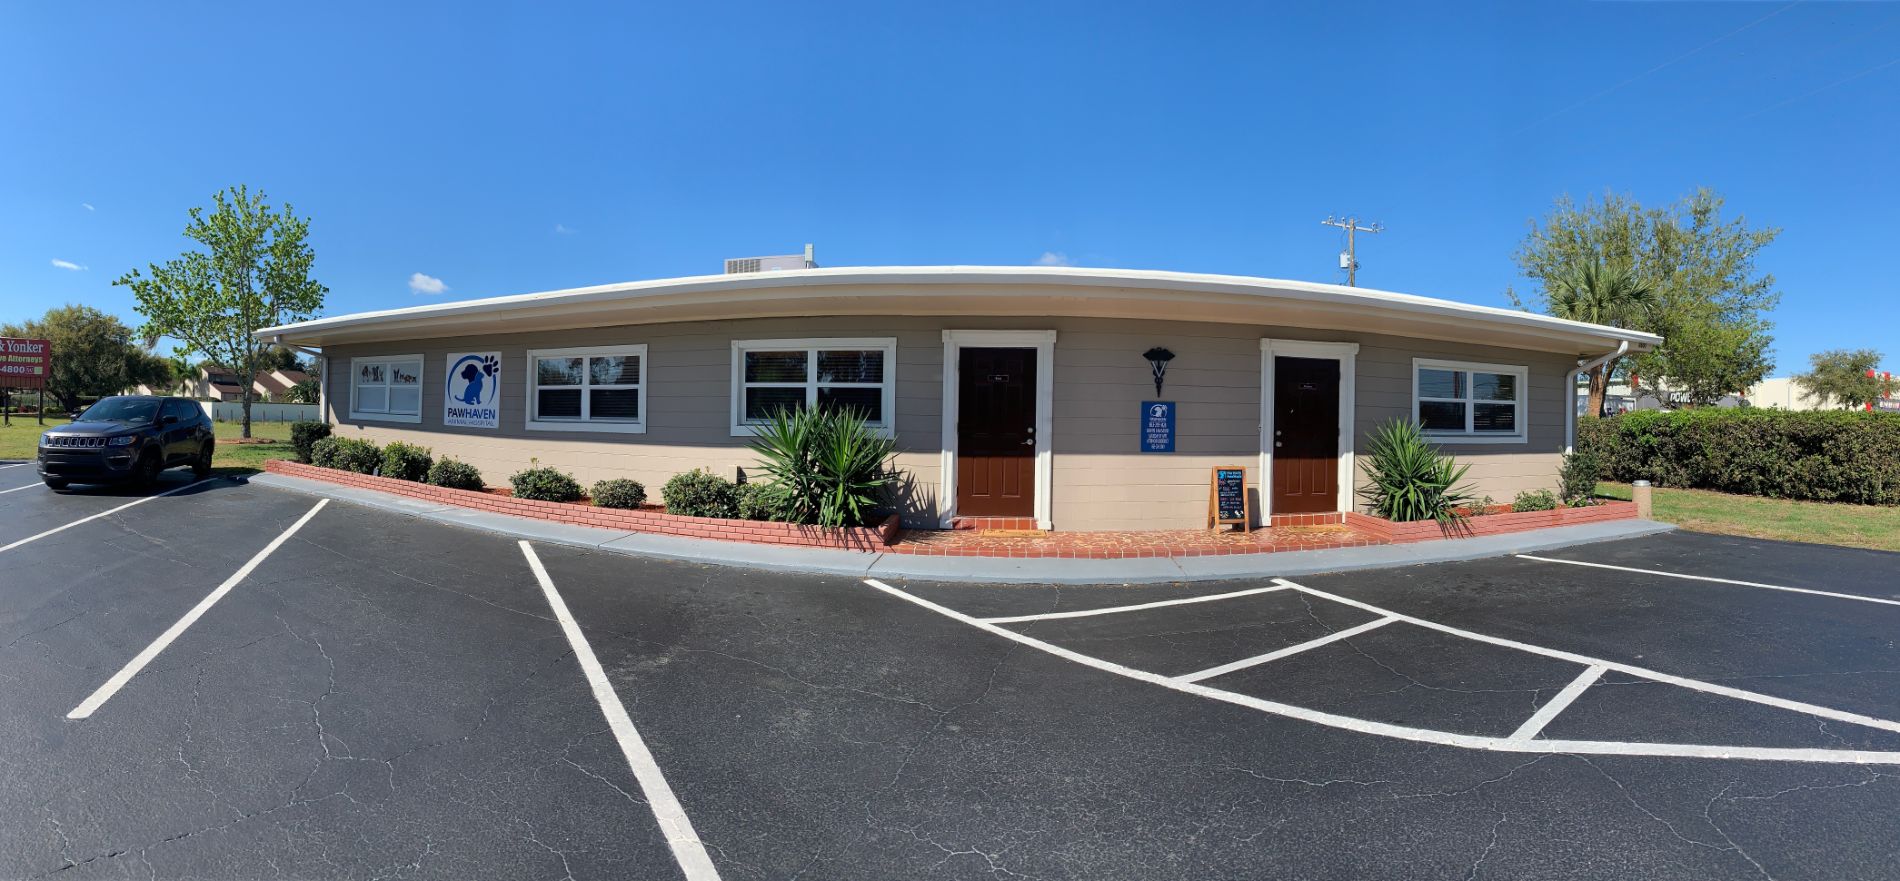 Paw Haven Animal Hospital front view